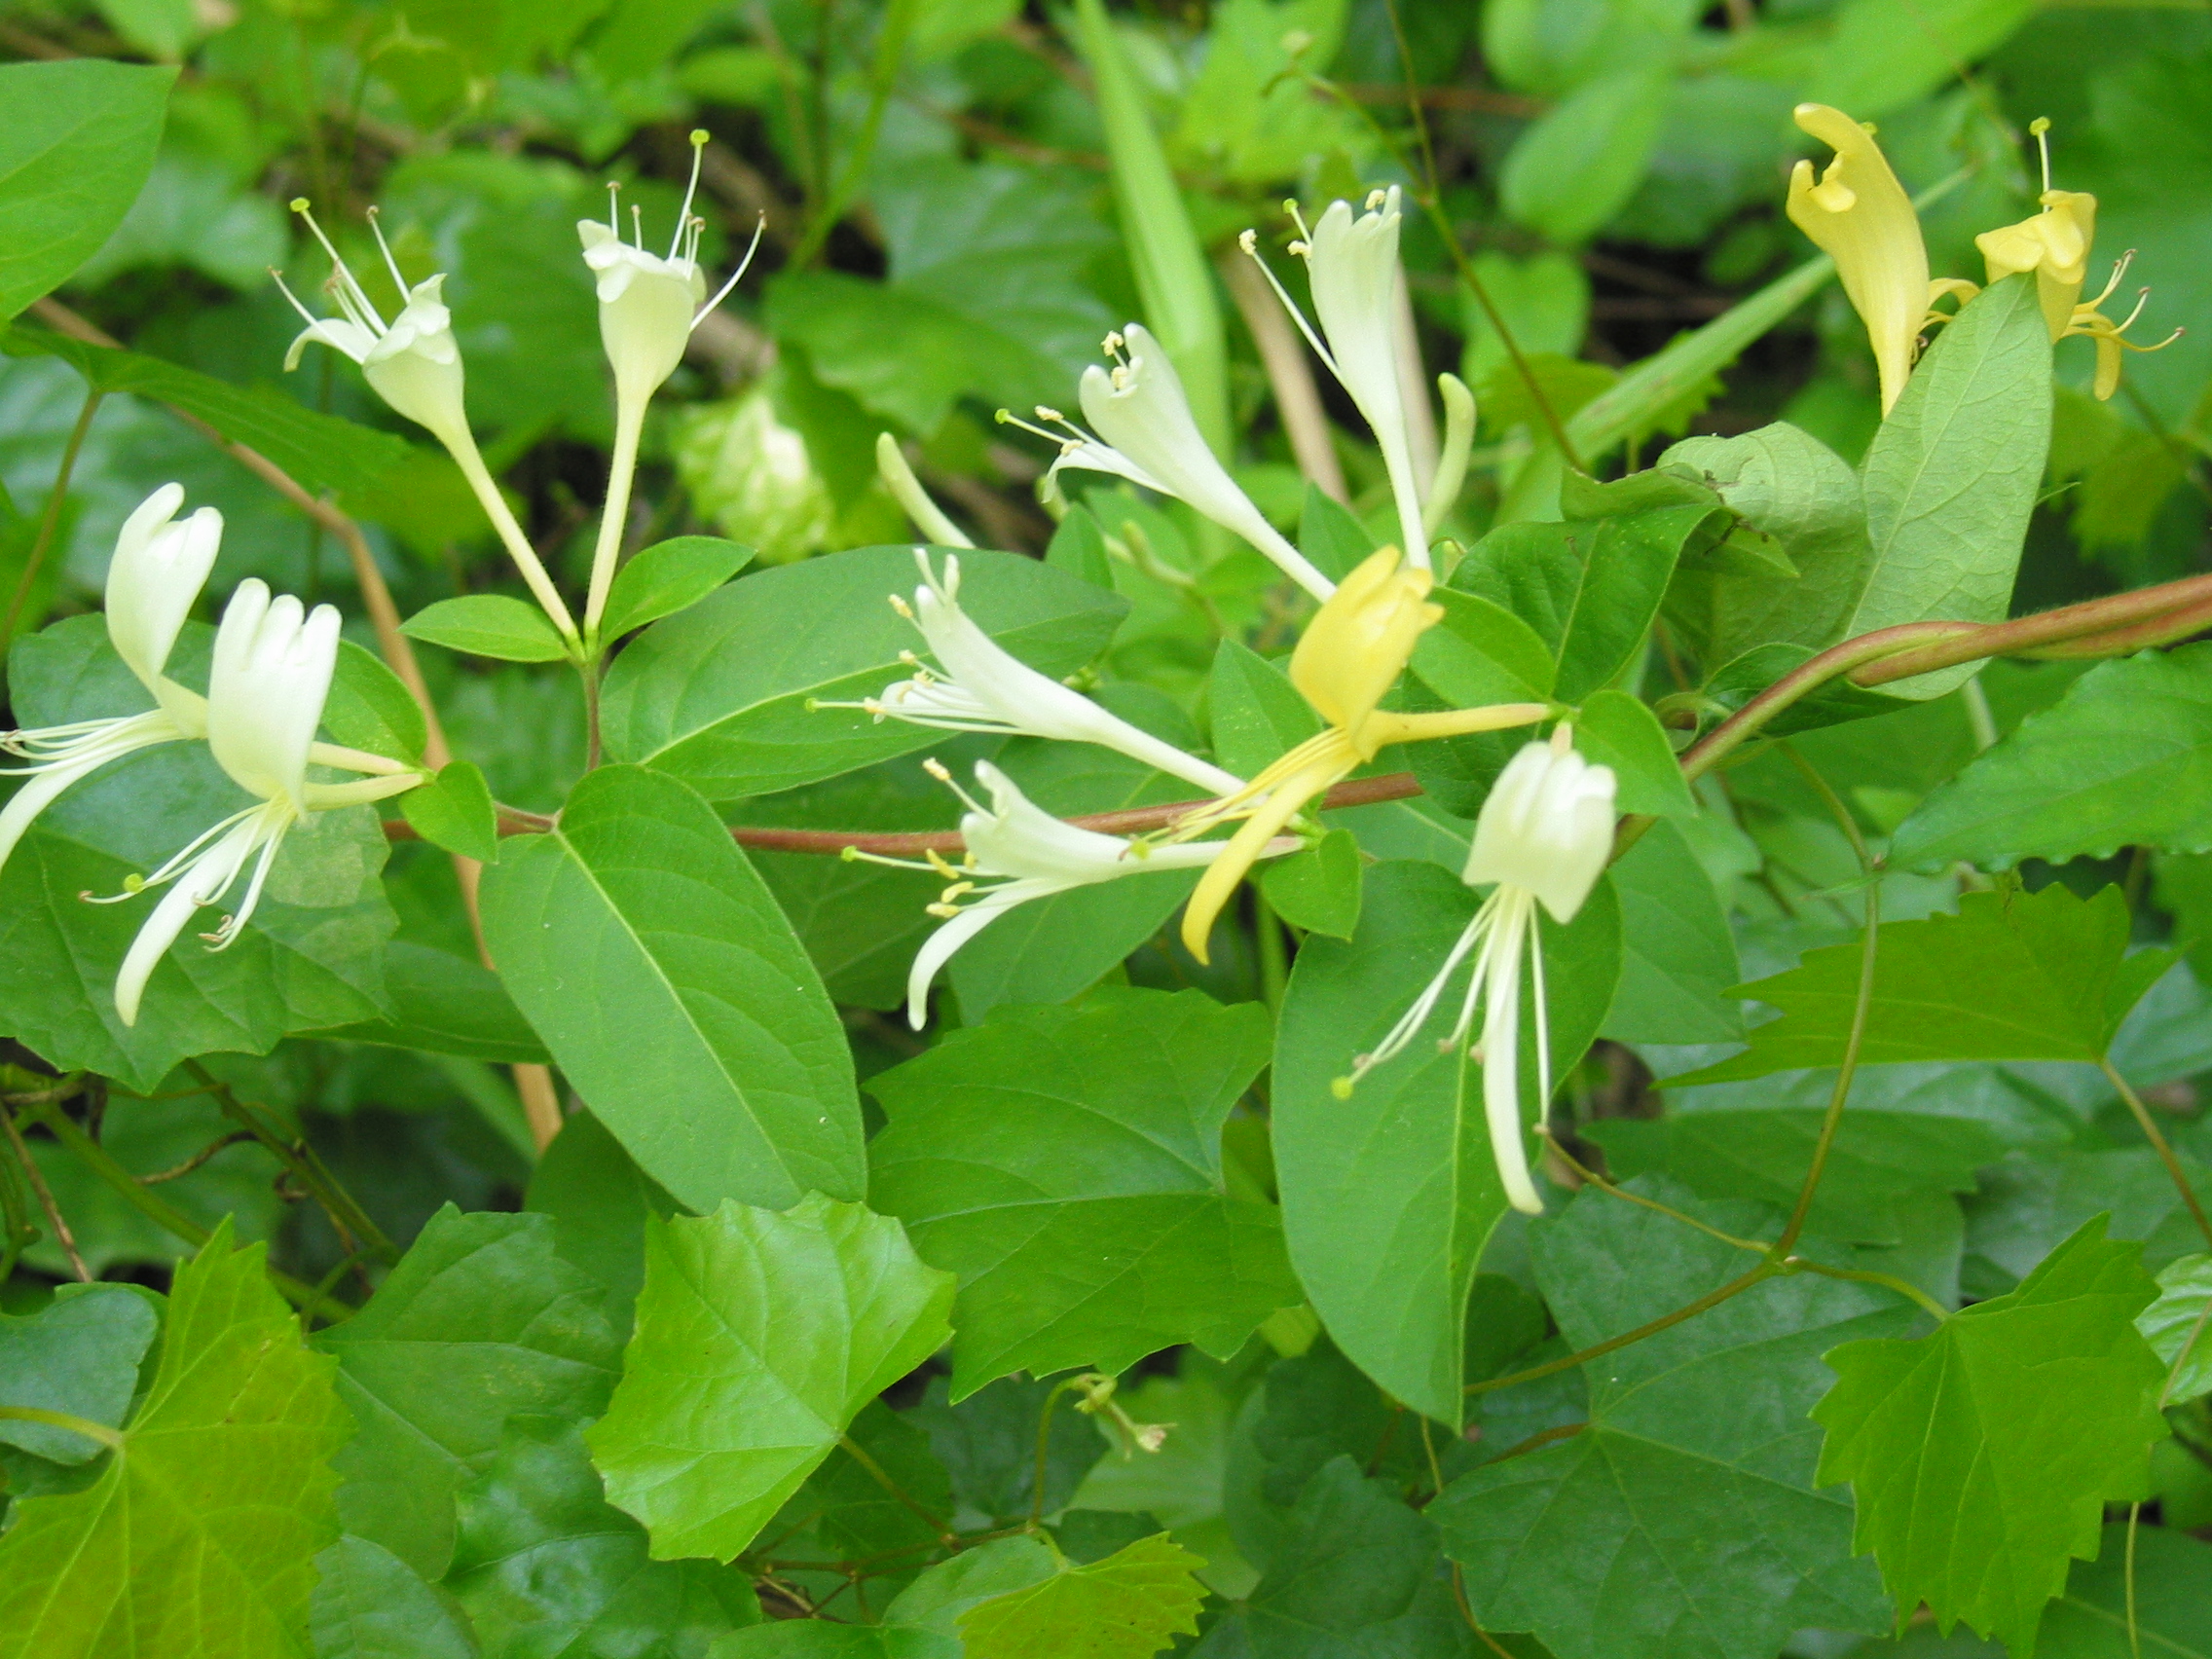 Flowering vine, with older flowers turning yellow.